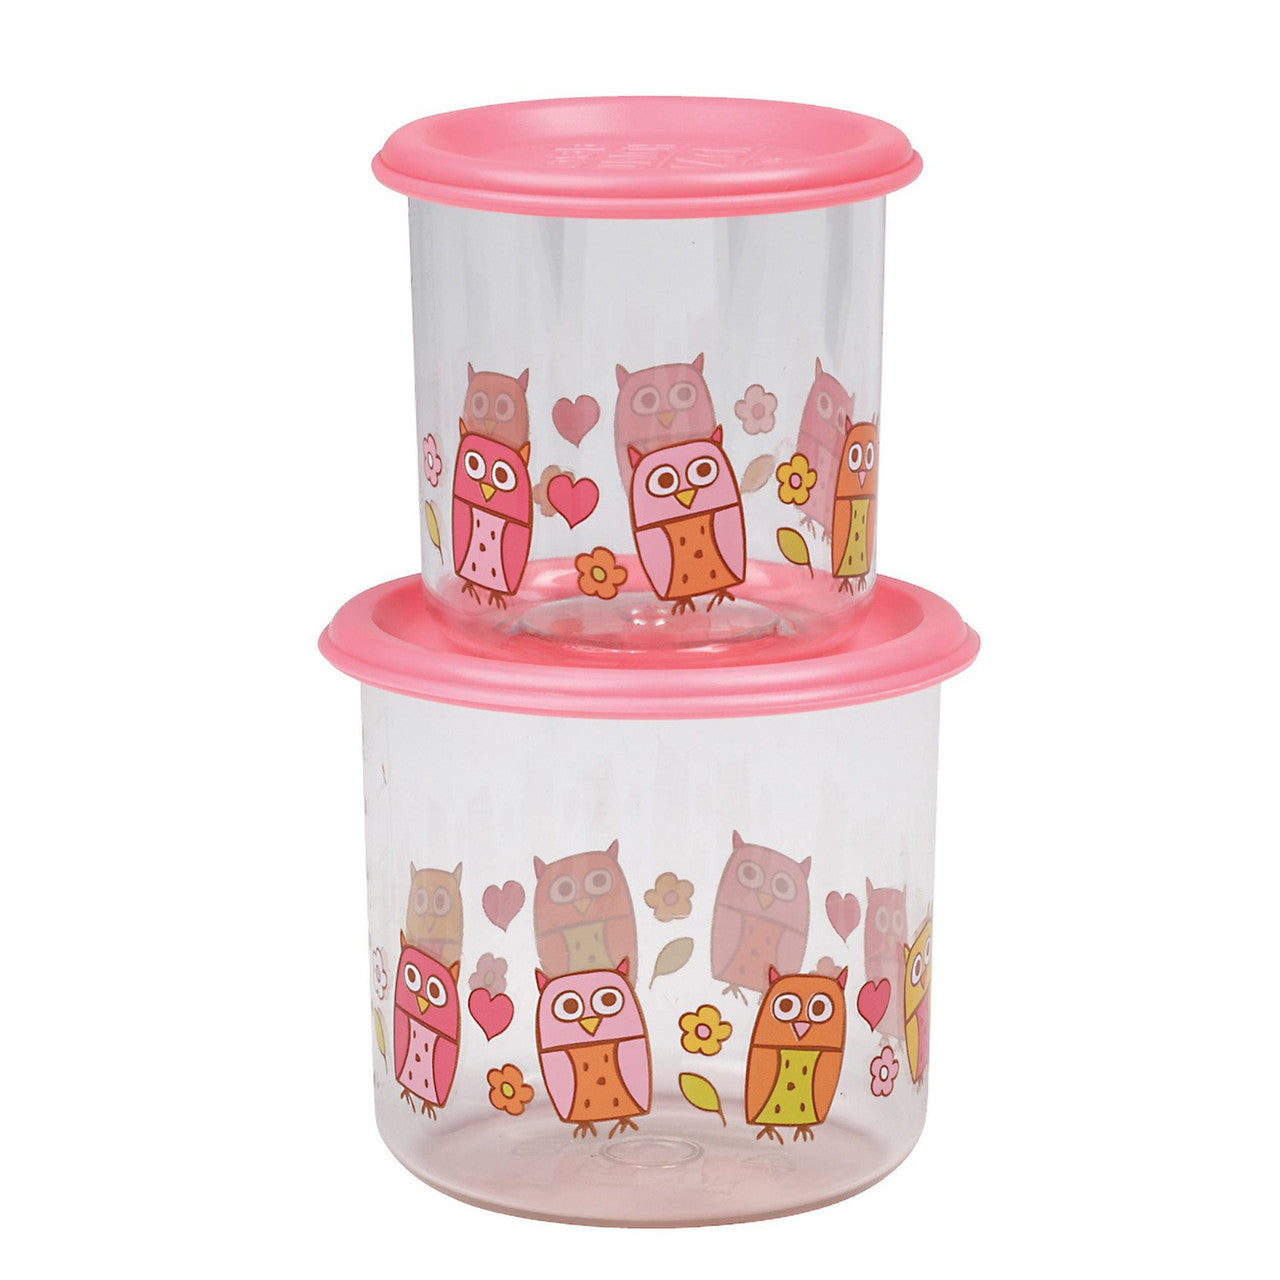 Good Lunch Snack Containers - Hoot! - Large